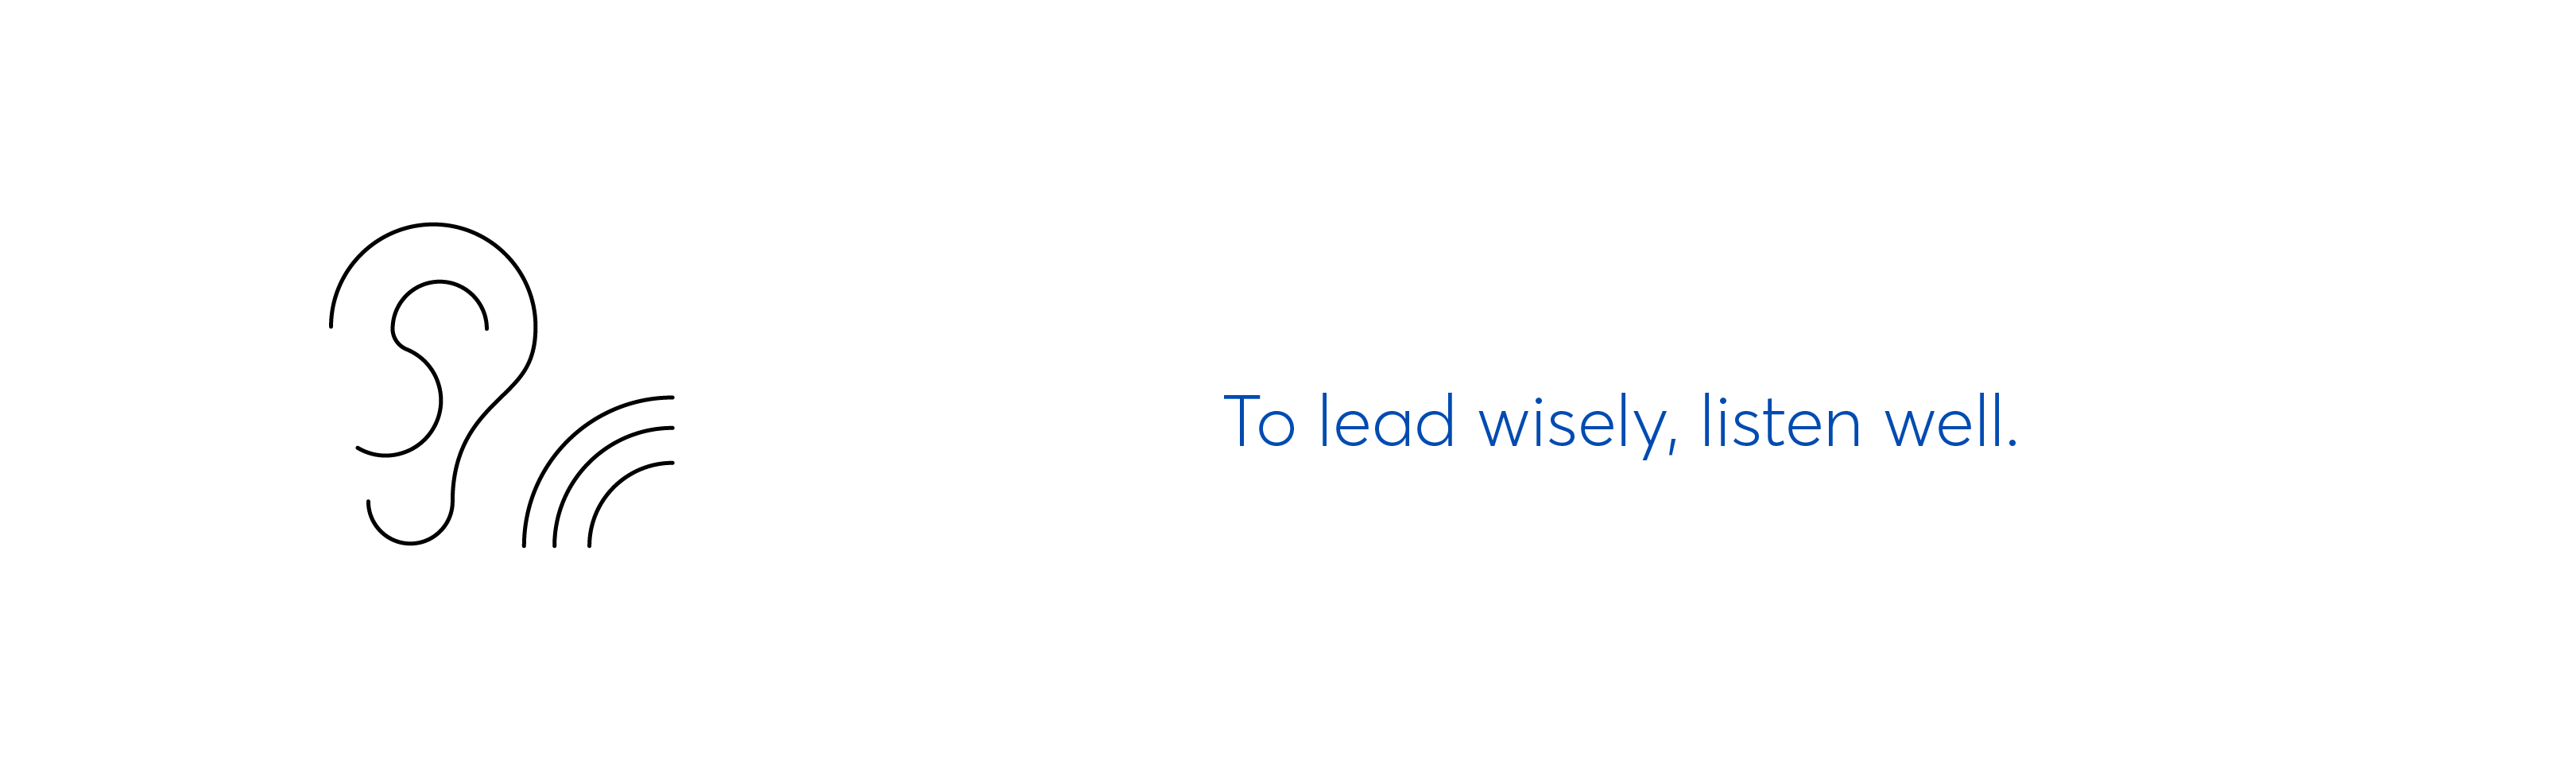 Lead wisely